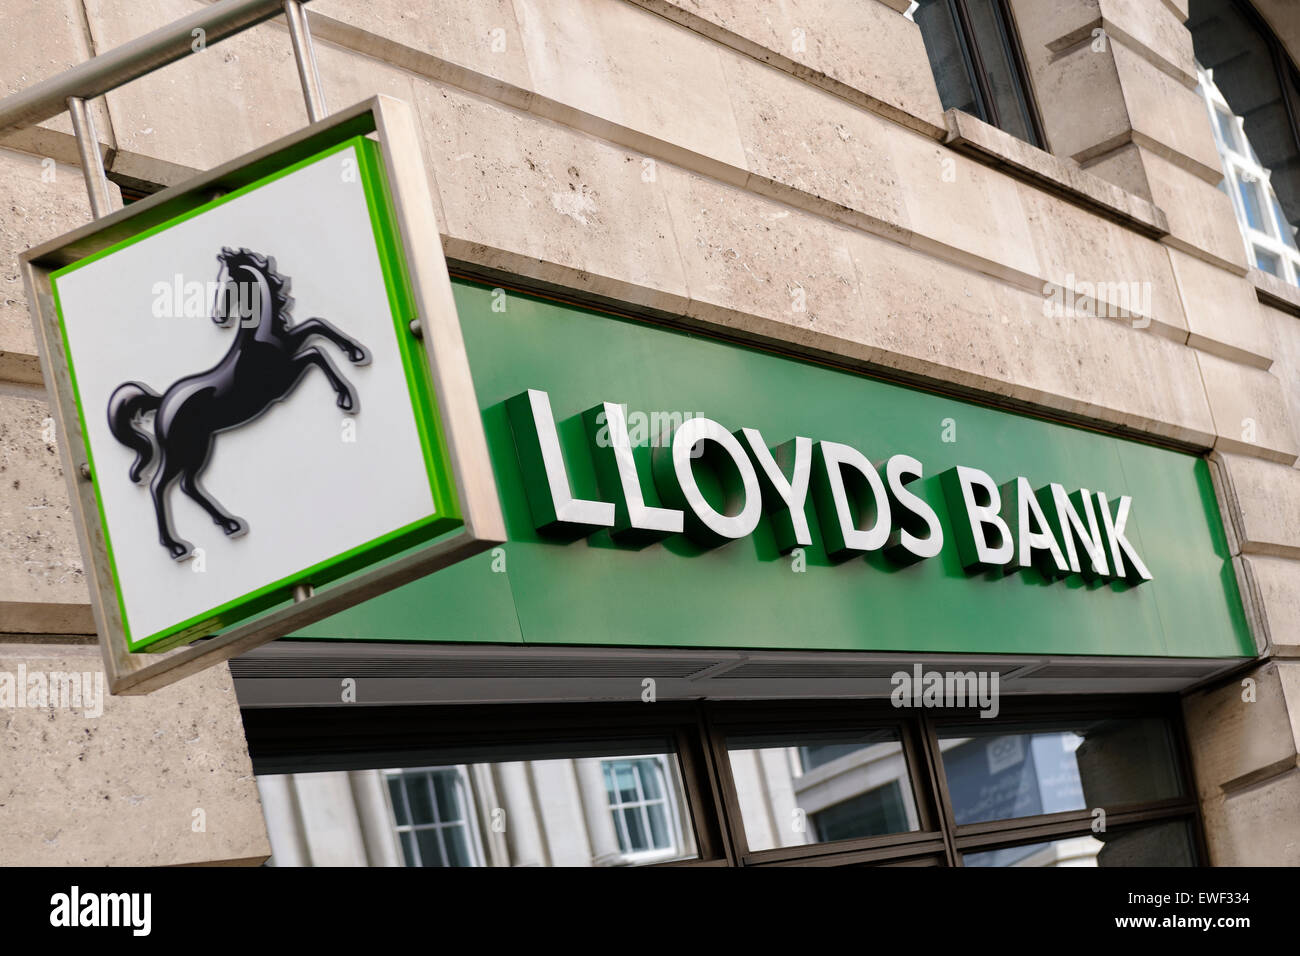 Lloyds Branch High Resolution Stock Photography and Images - Alamy